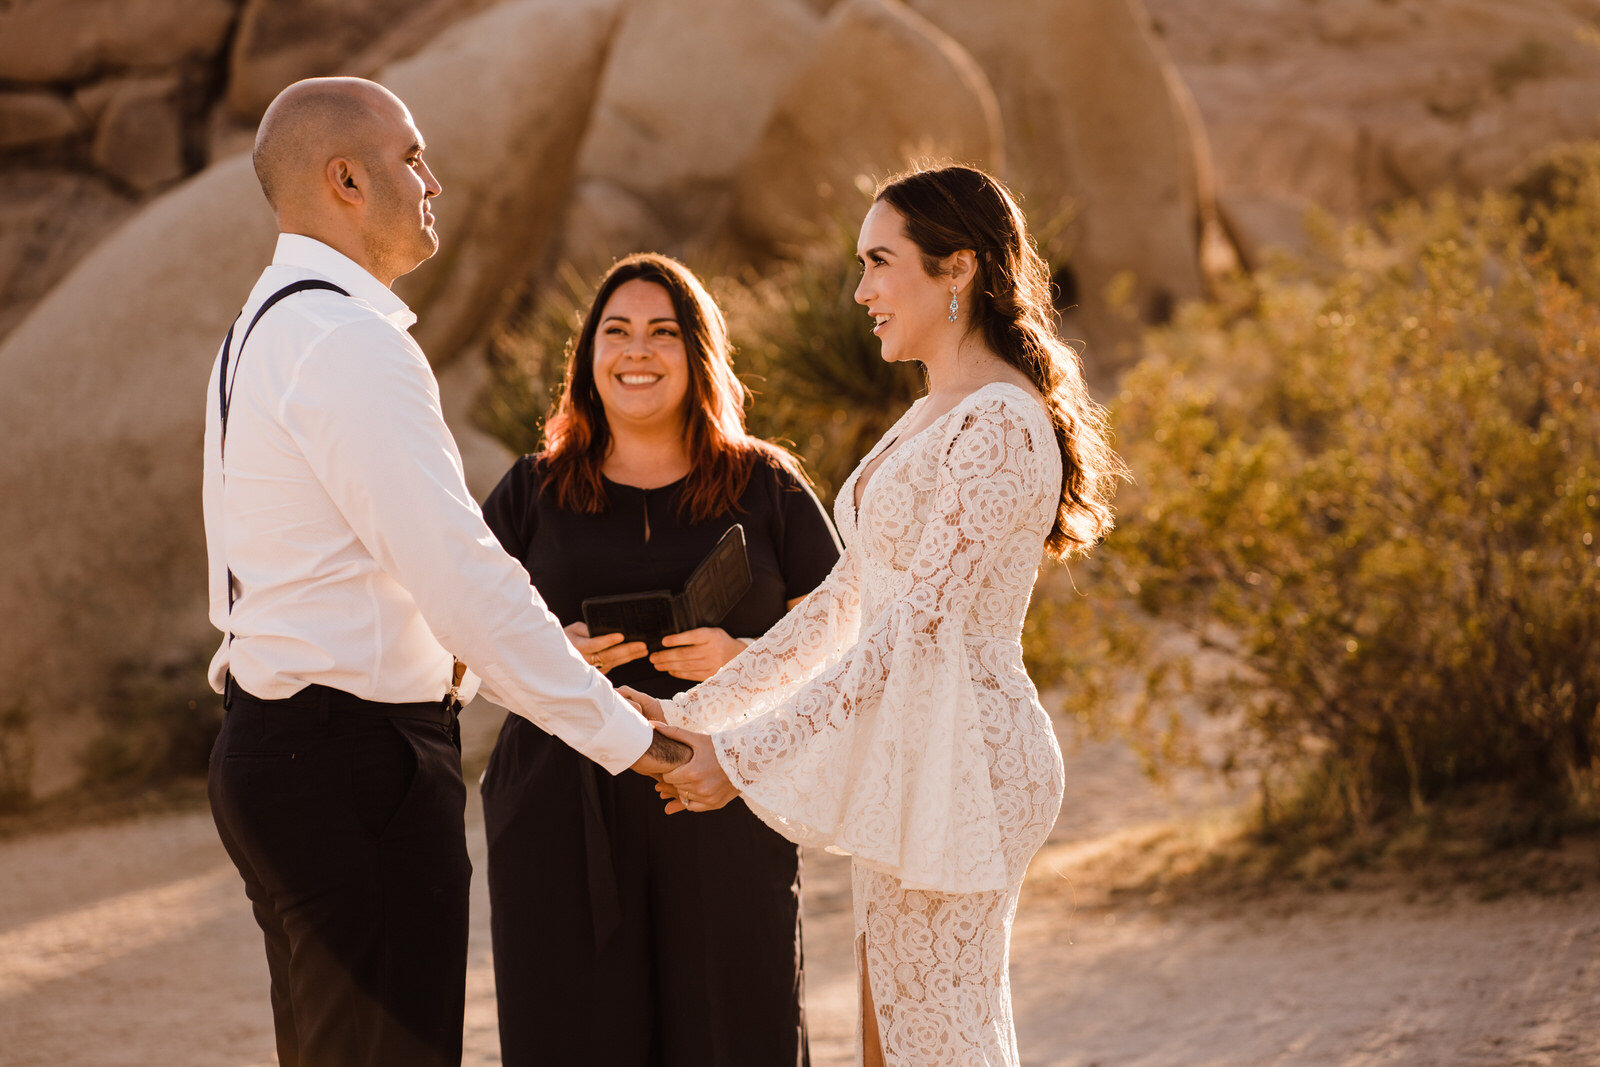 Bride and groom with Marie Burns Holzer of Lets Get Married by Marie at Joshua Tree Elopement Ceremony | adventurous, fun, warm wedding photos by Kept Record | www.keptrecord.com